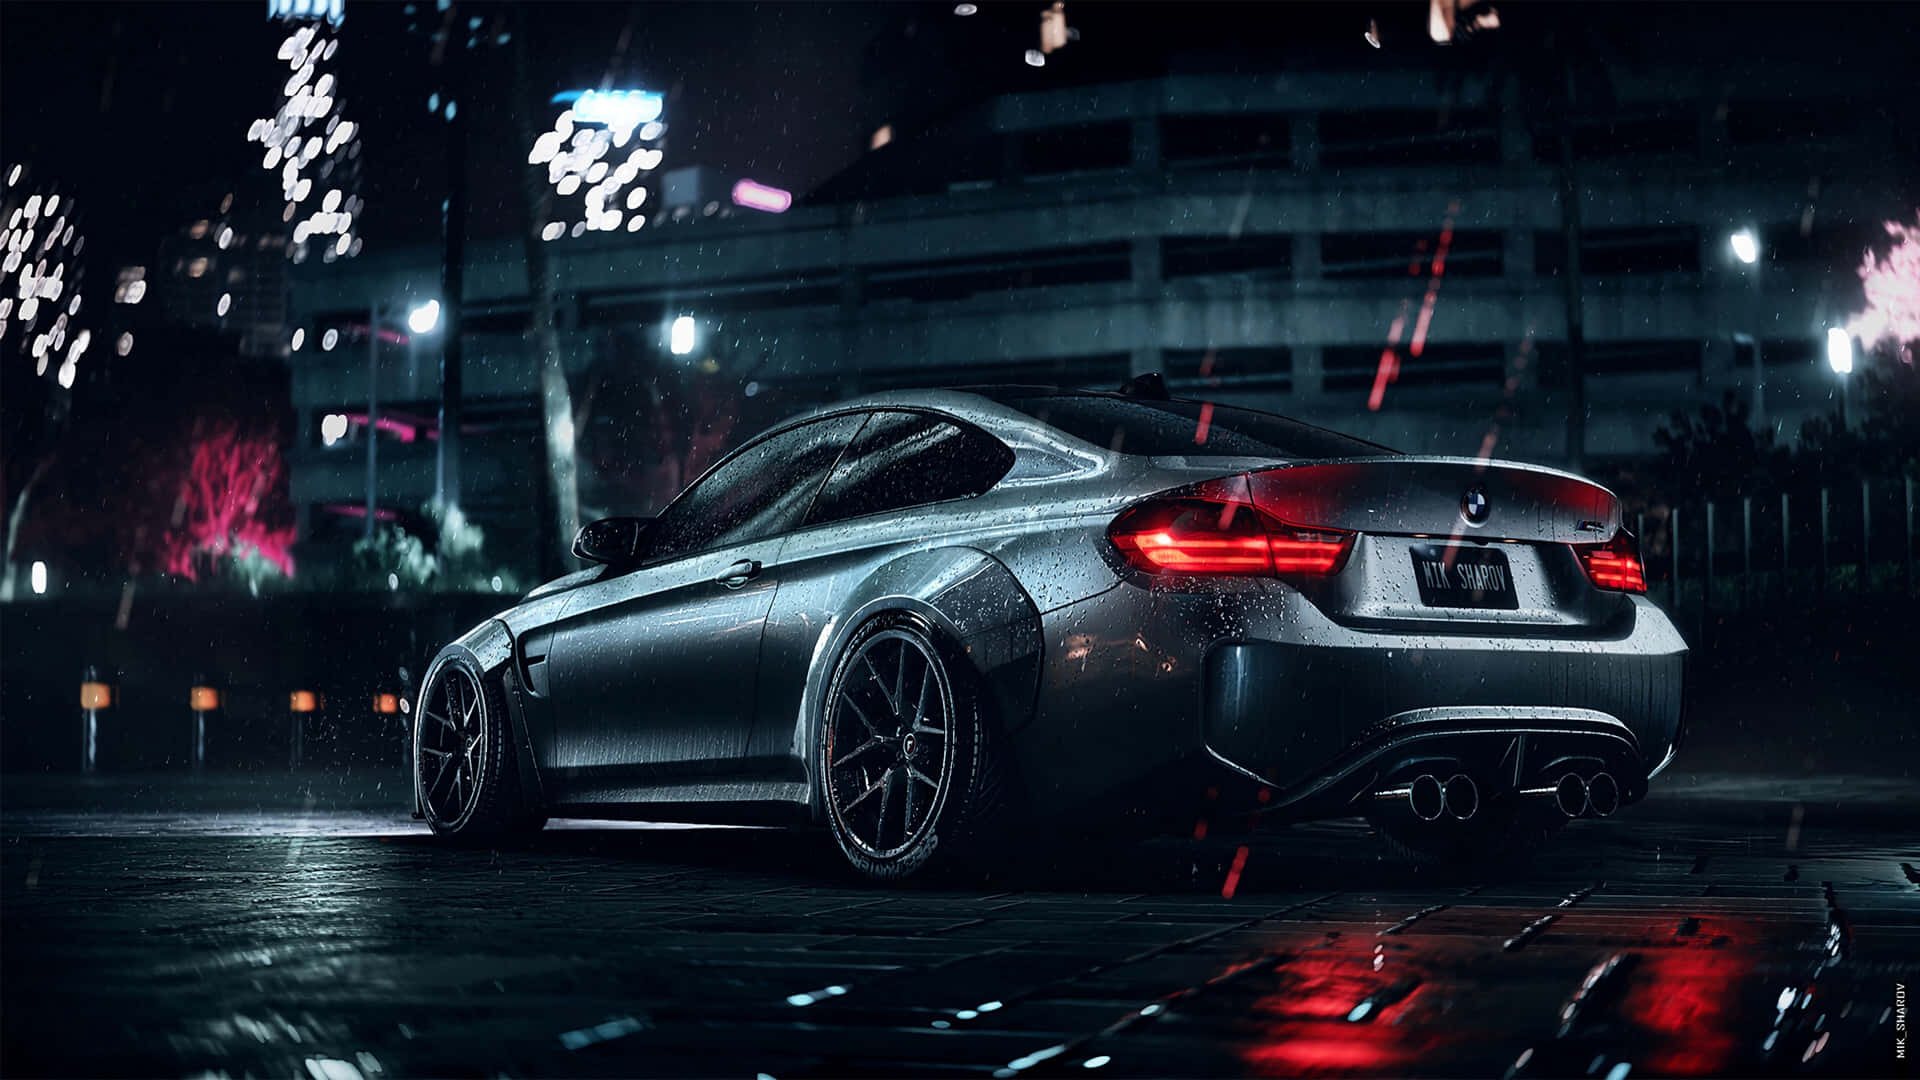 This BMW's sleek design and 4K resolution make it the perfect background for any desktop.